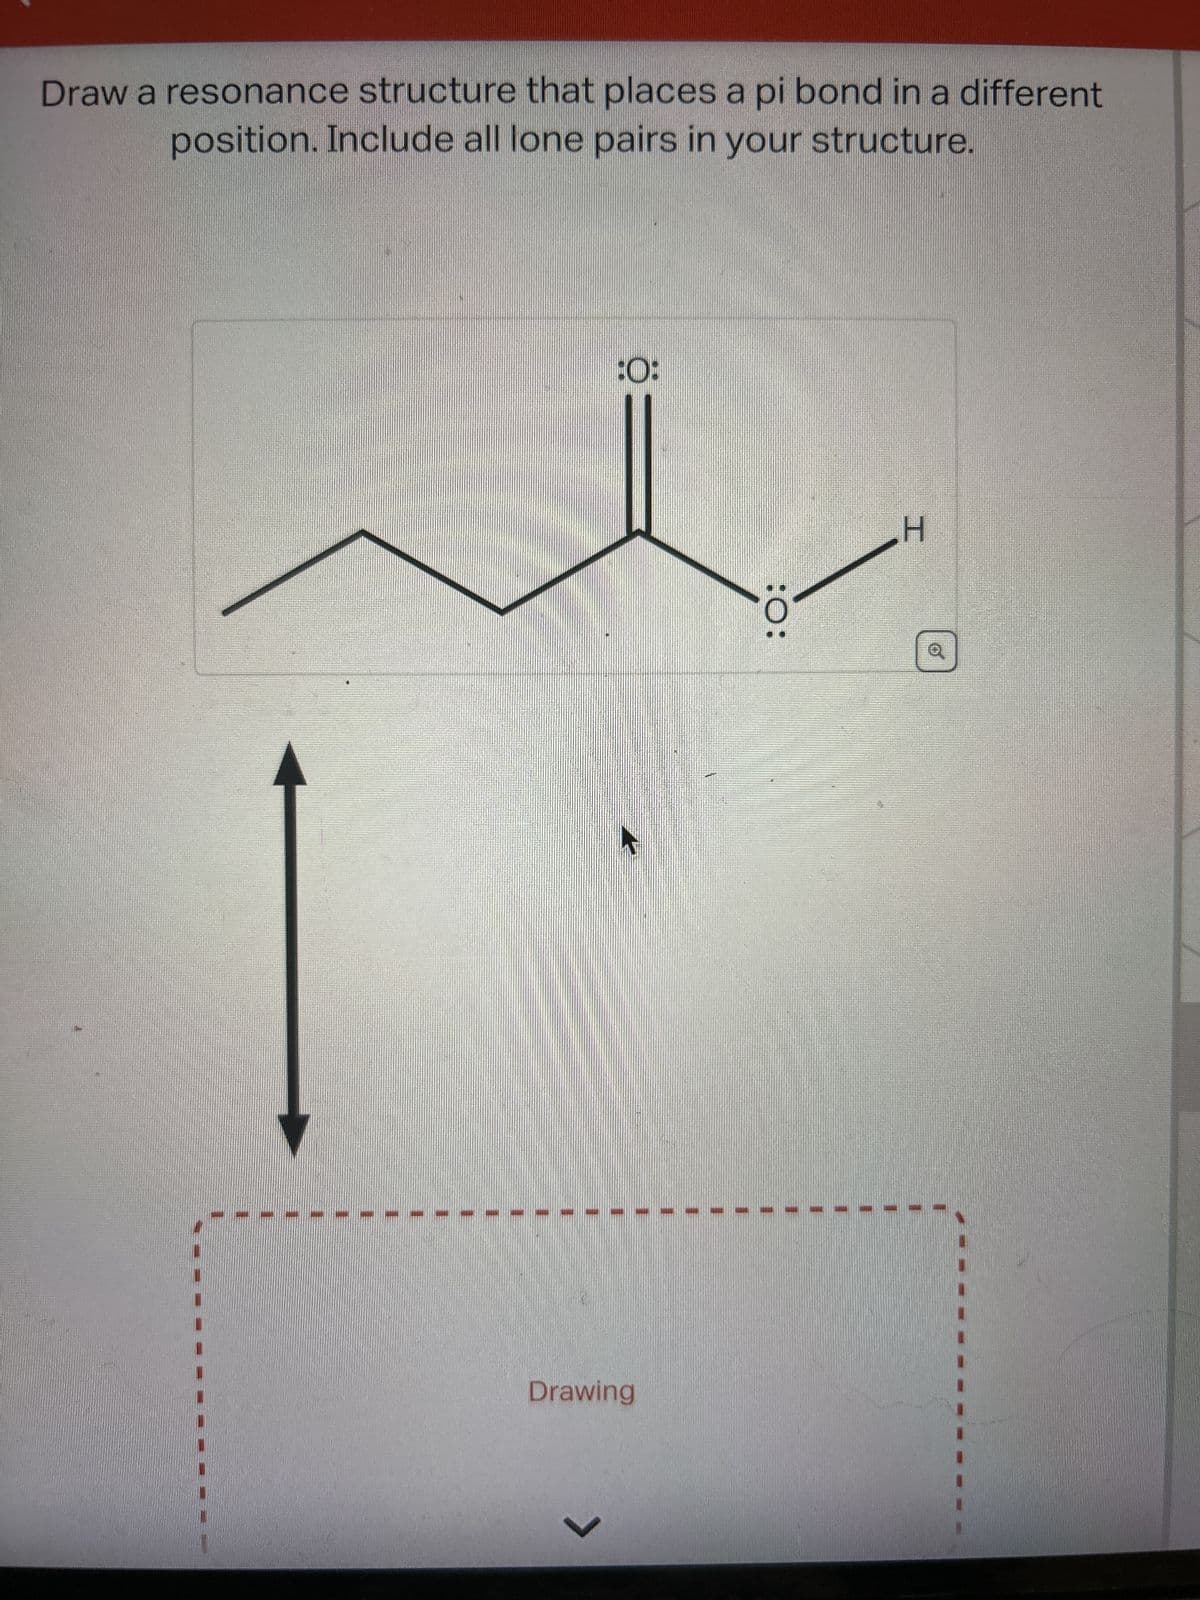 Draw a resonance structure that places a pi bond in a different
position. Include all lone pairs in your structure.
:0:
Drawing
>
:O:
H